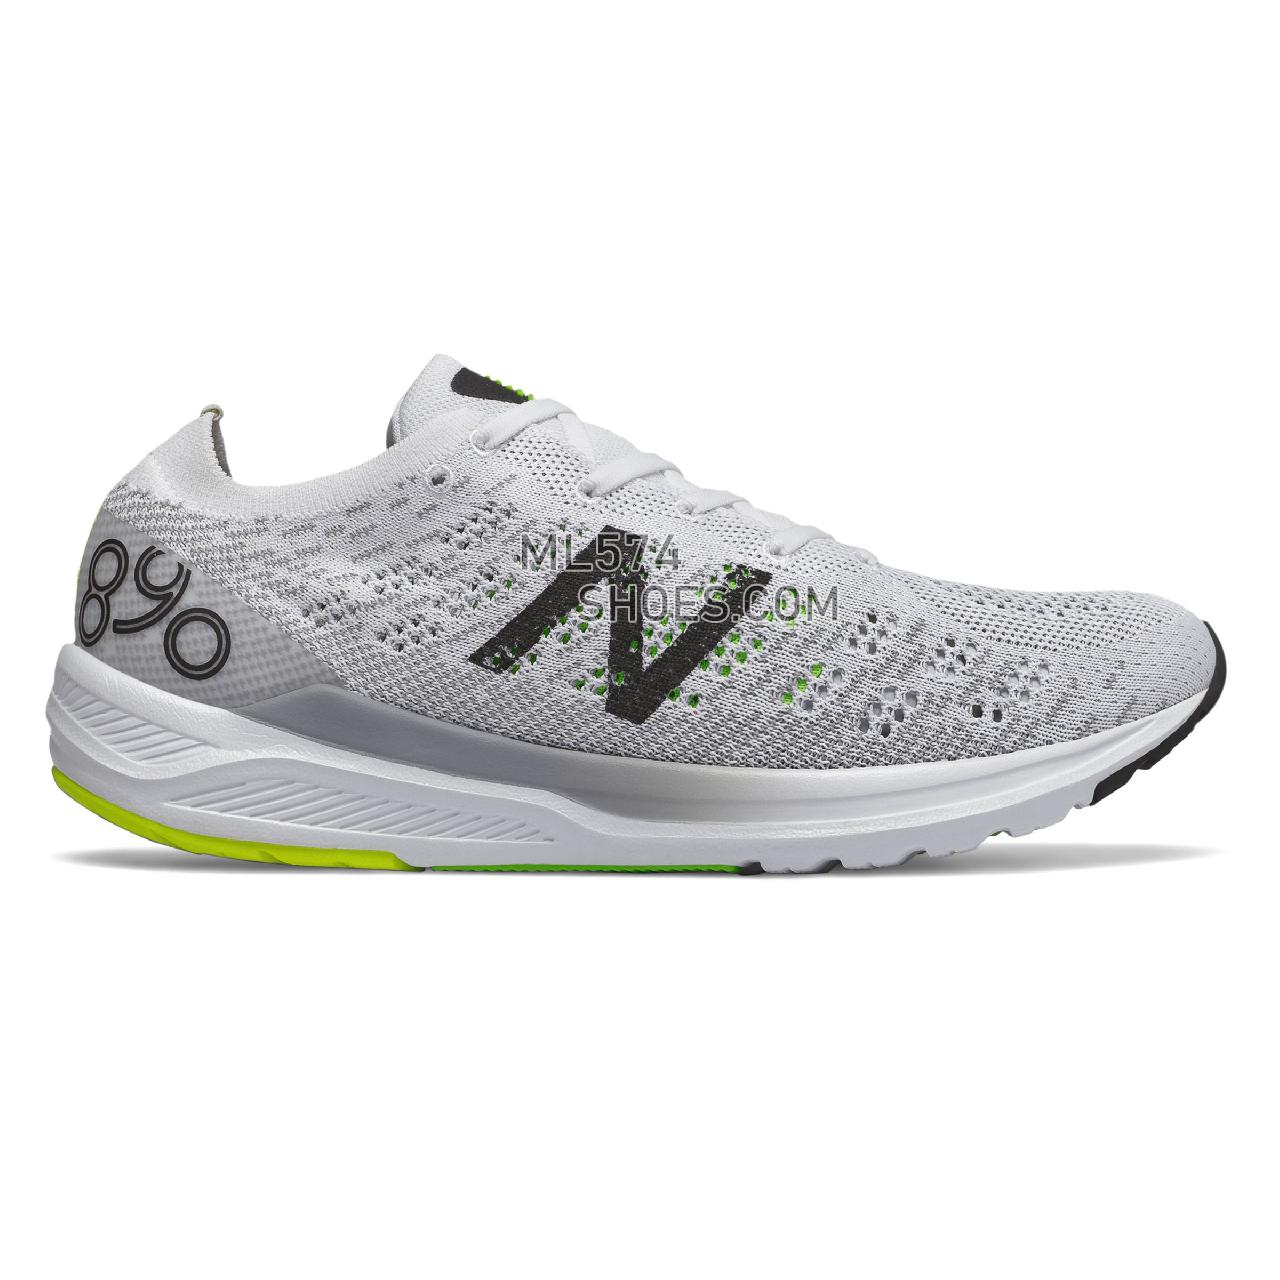 New Balance 890v7 - Men's Neutral Running - White with Black and RGB Green - M890WB7